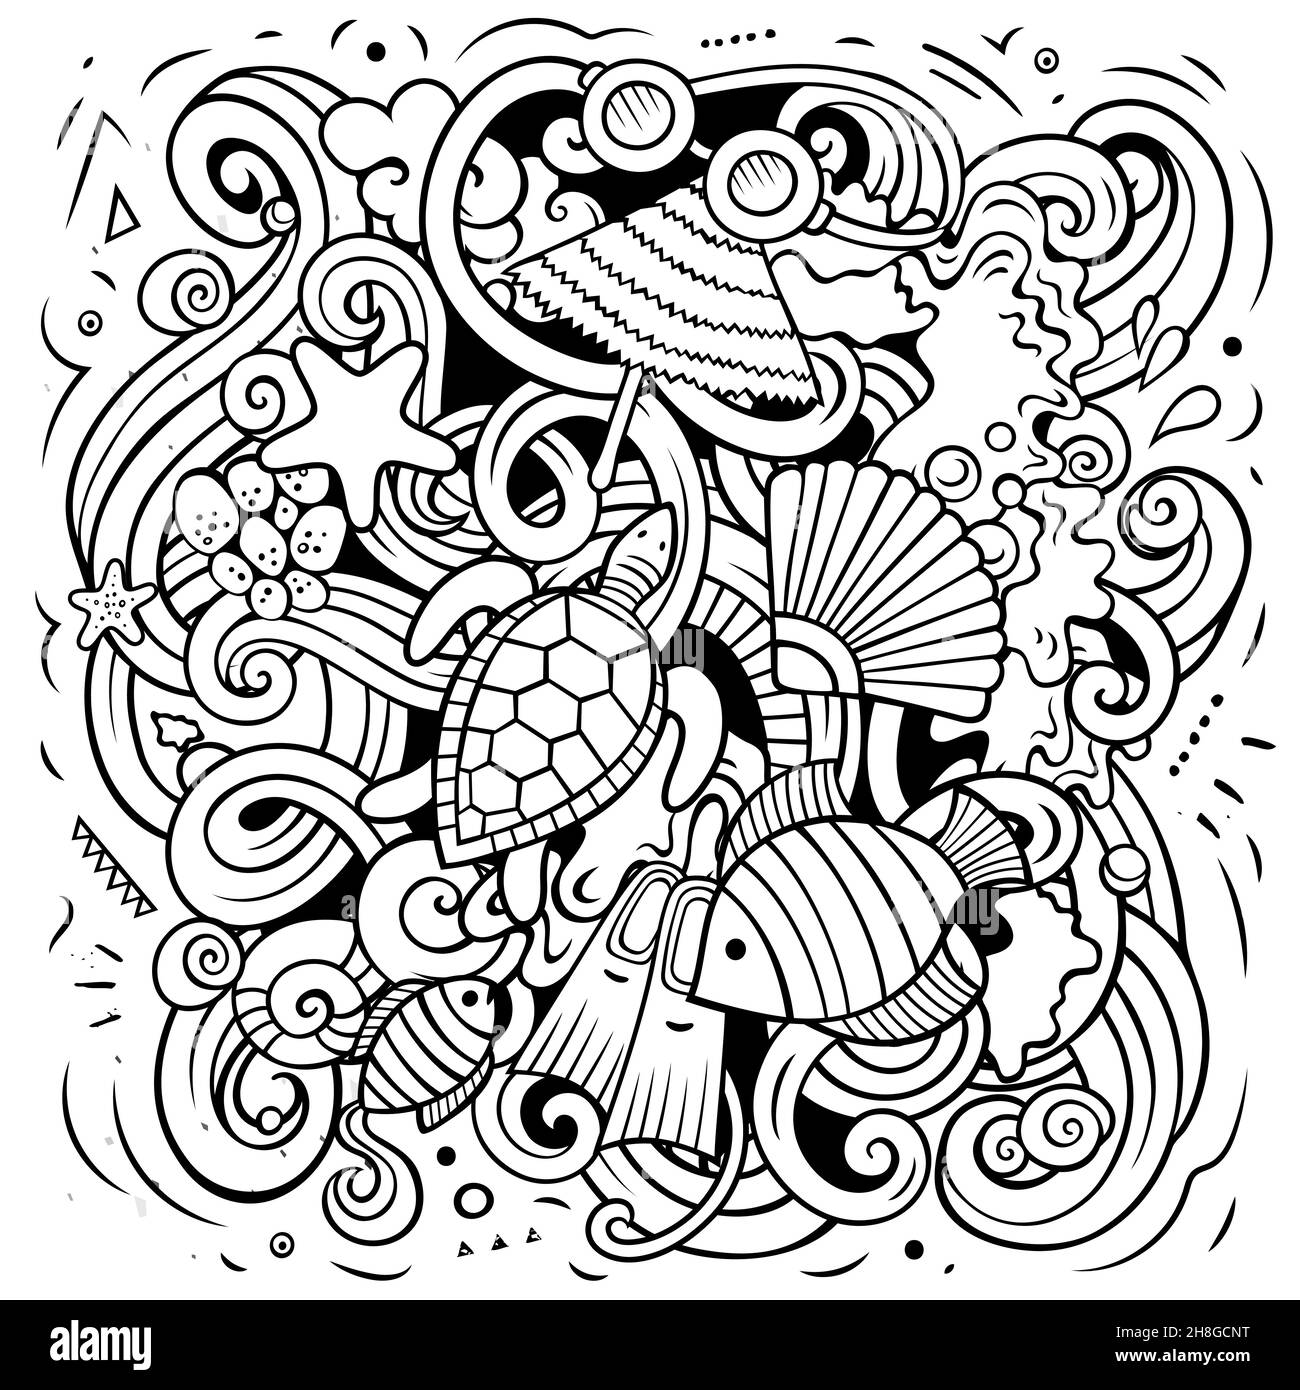 Mauritus cartoon vector doodle illustration. Sketchy detailed composition with lot of Exotic island objects and symbols. Stock Vector